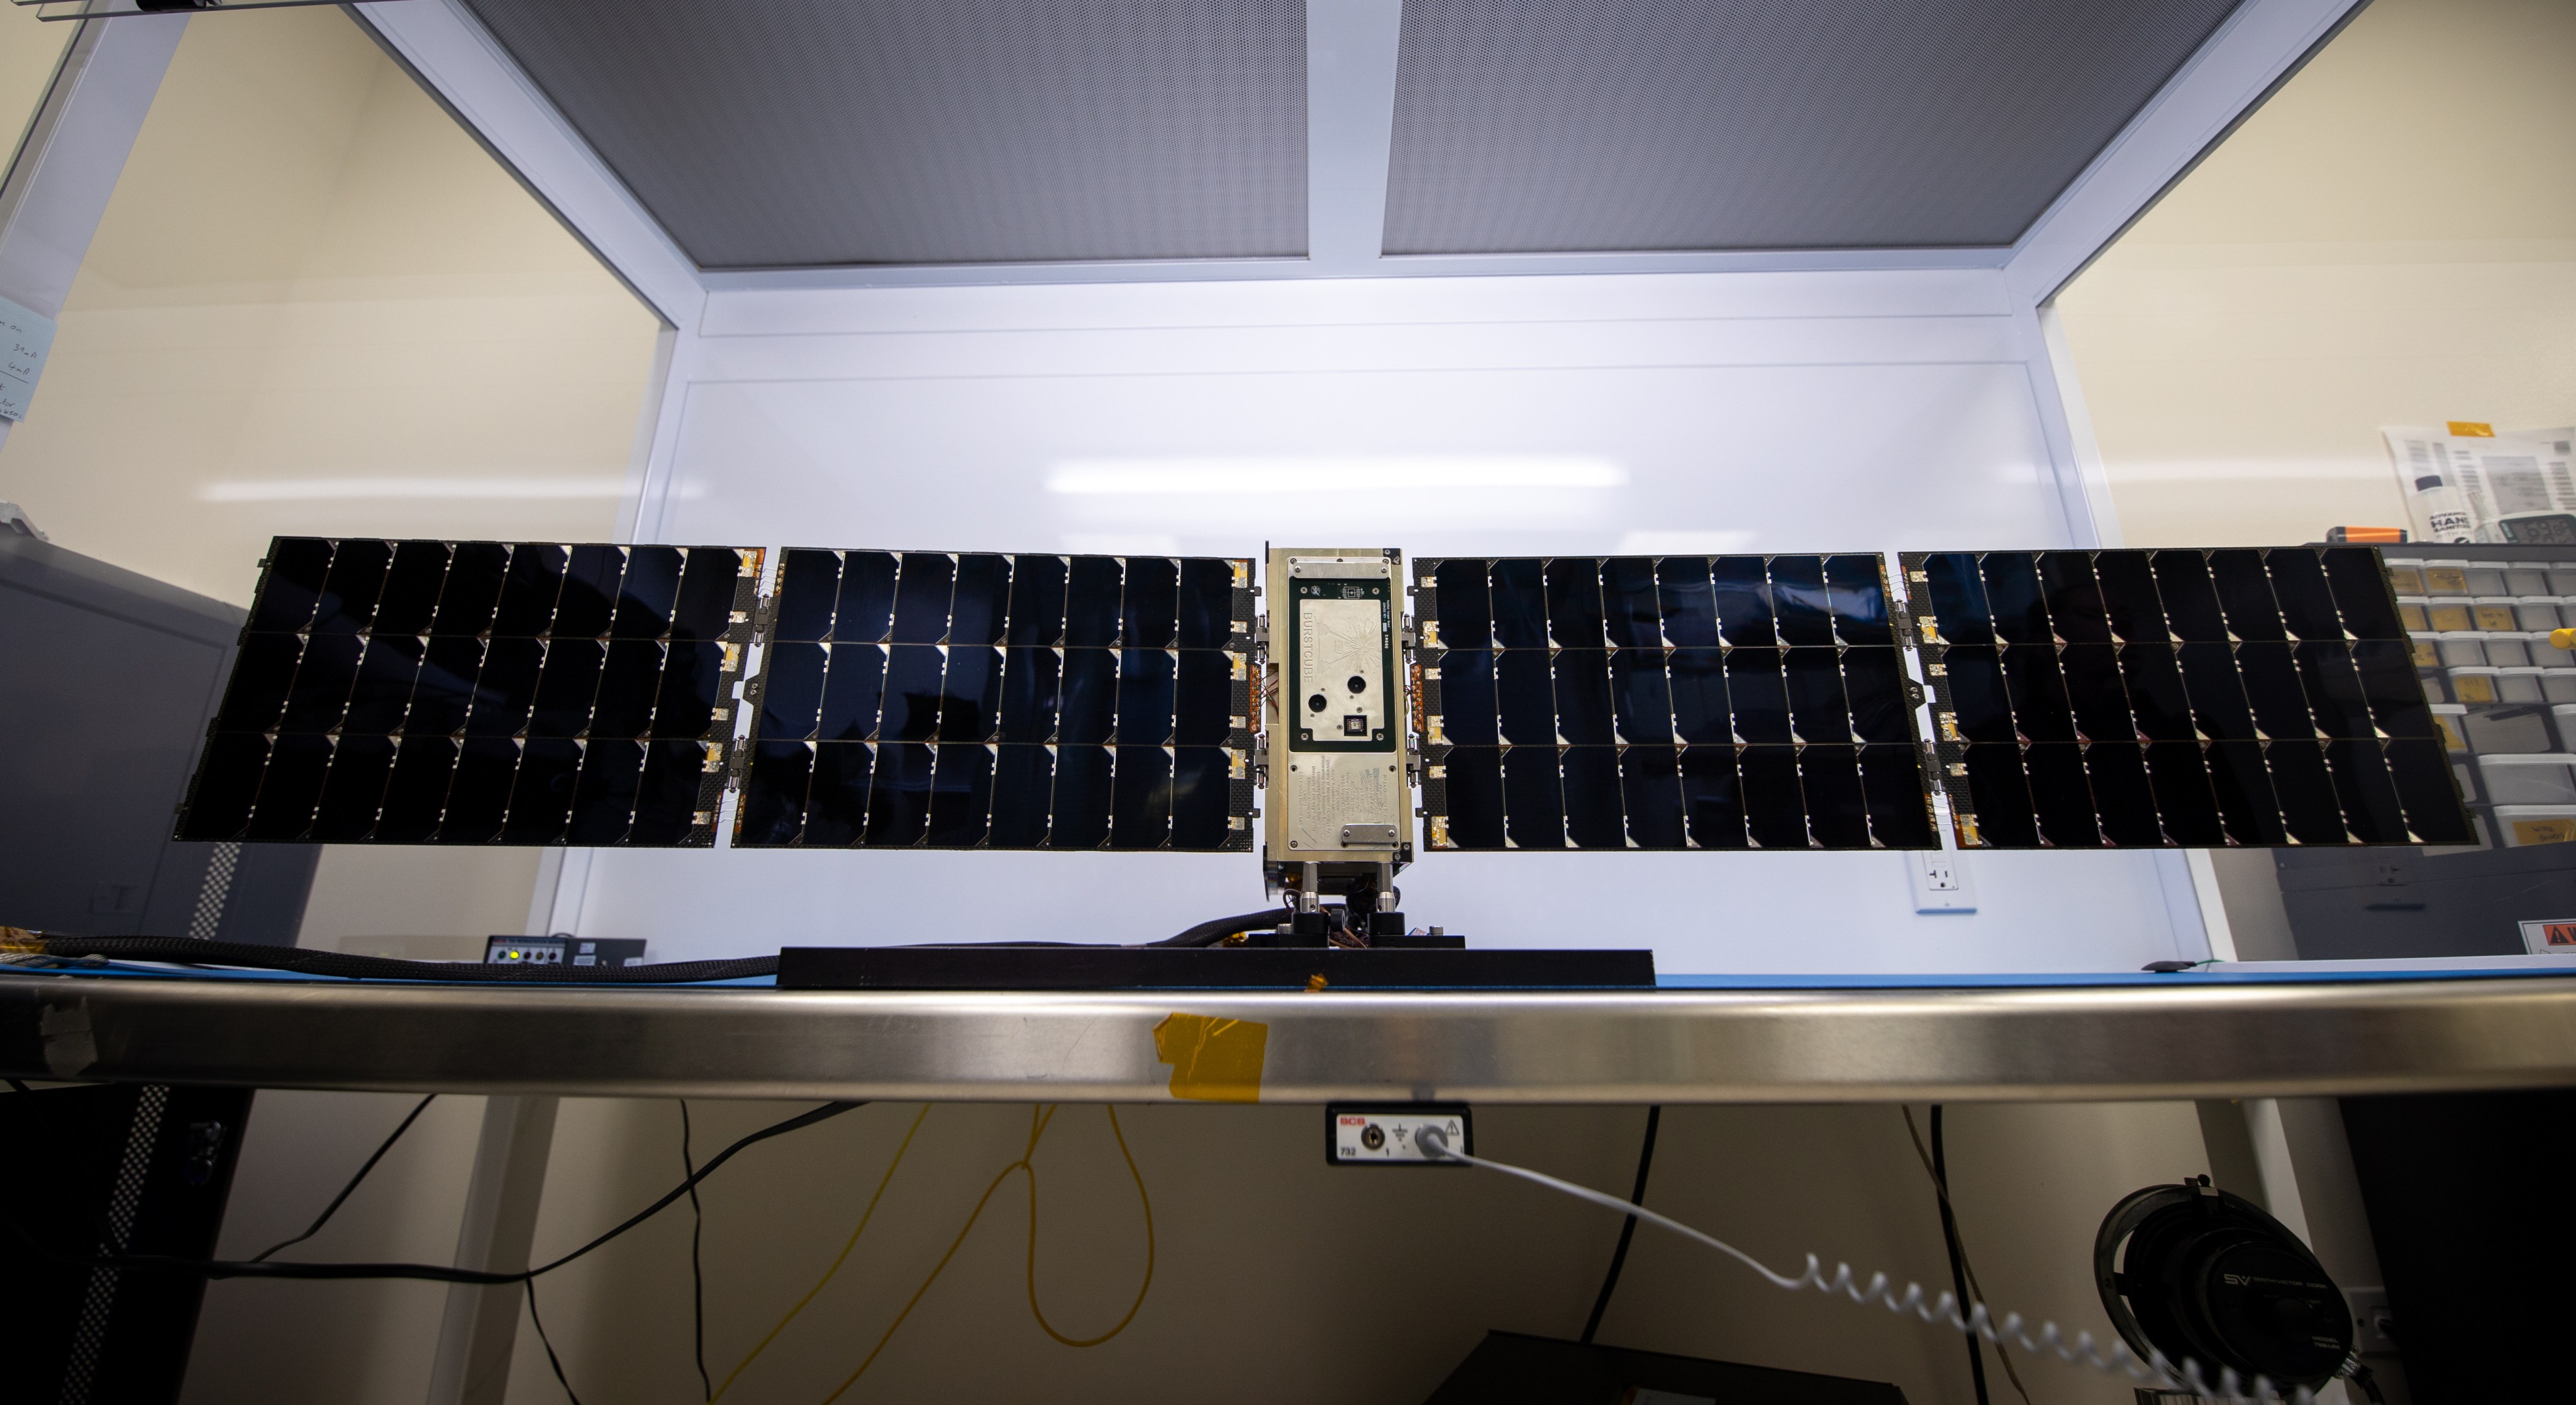 The BurstCube satellite sits on a table with its solar panels extended.